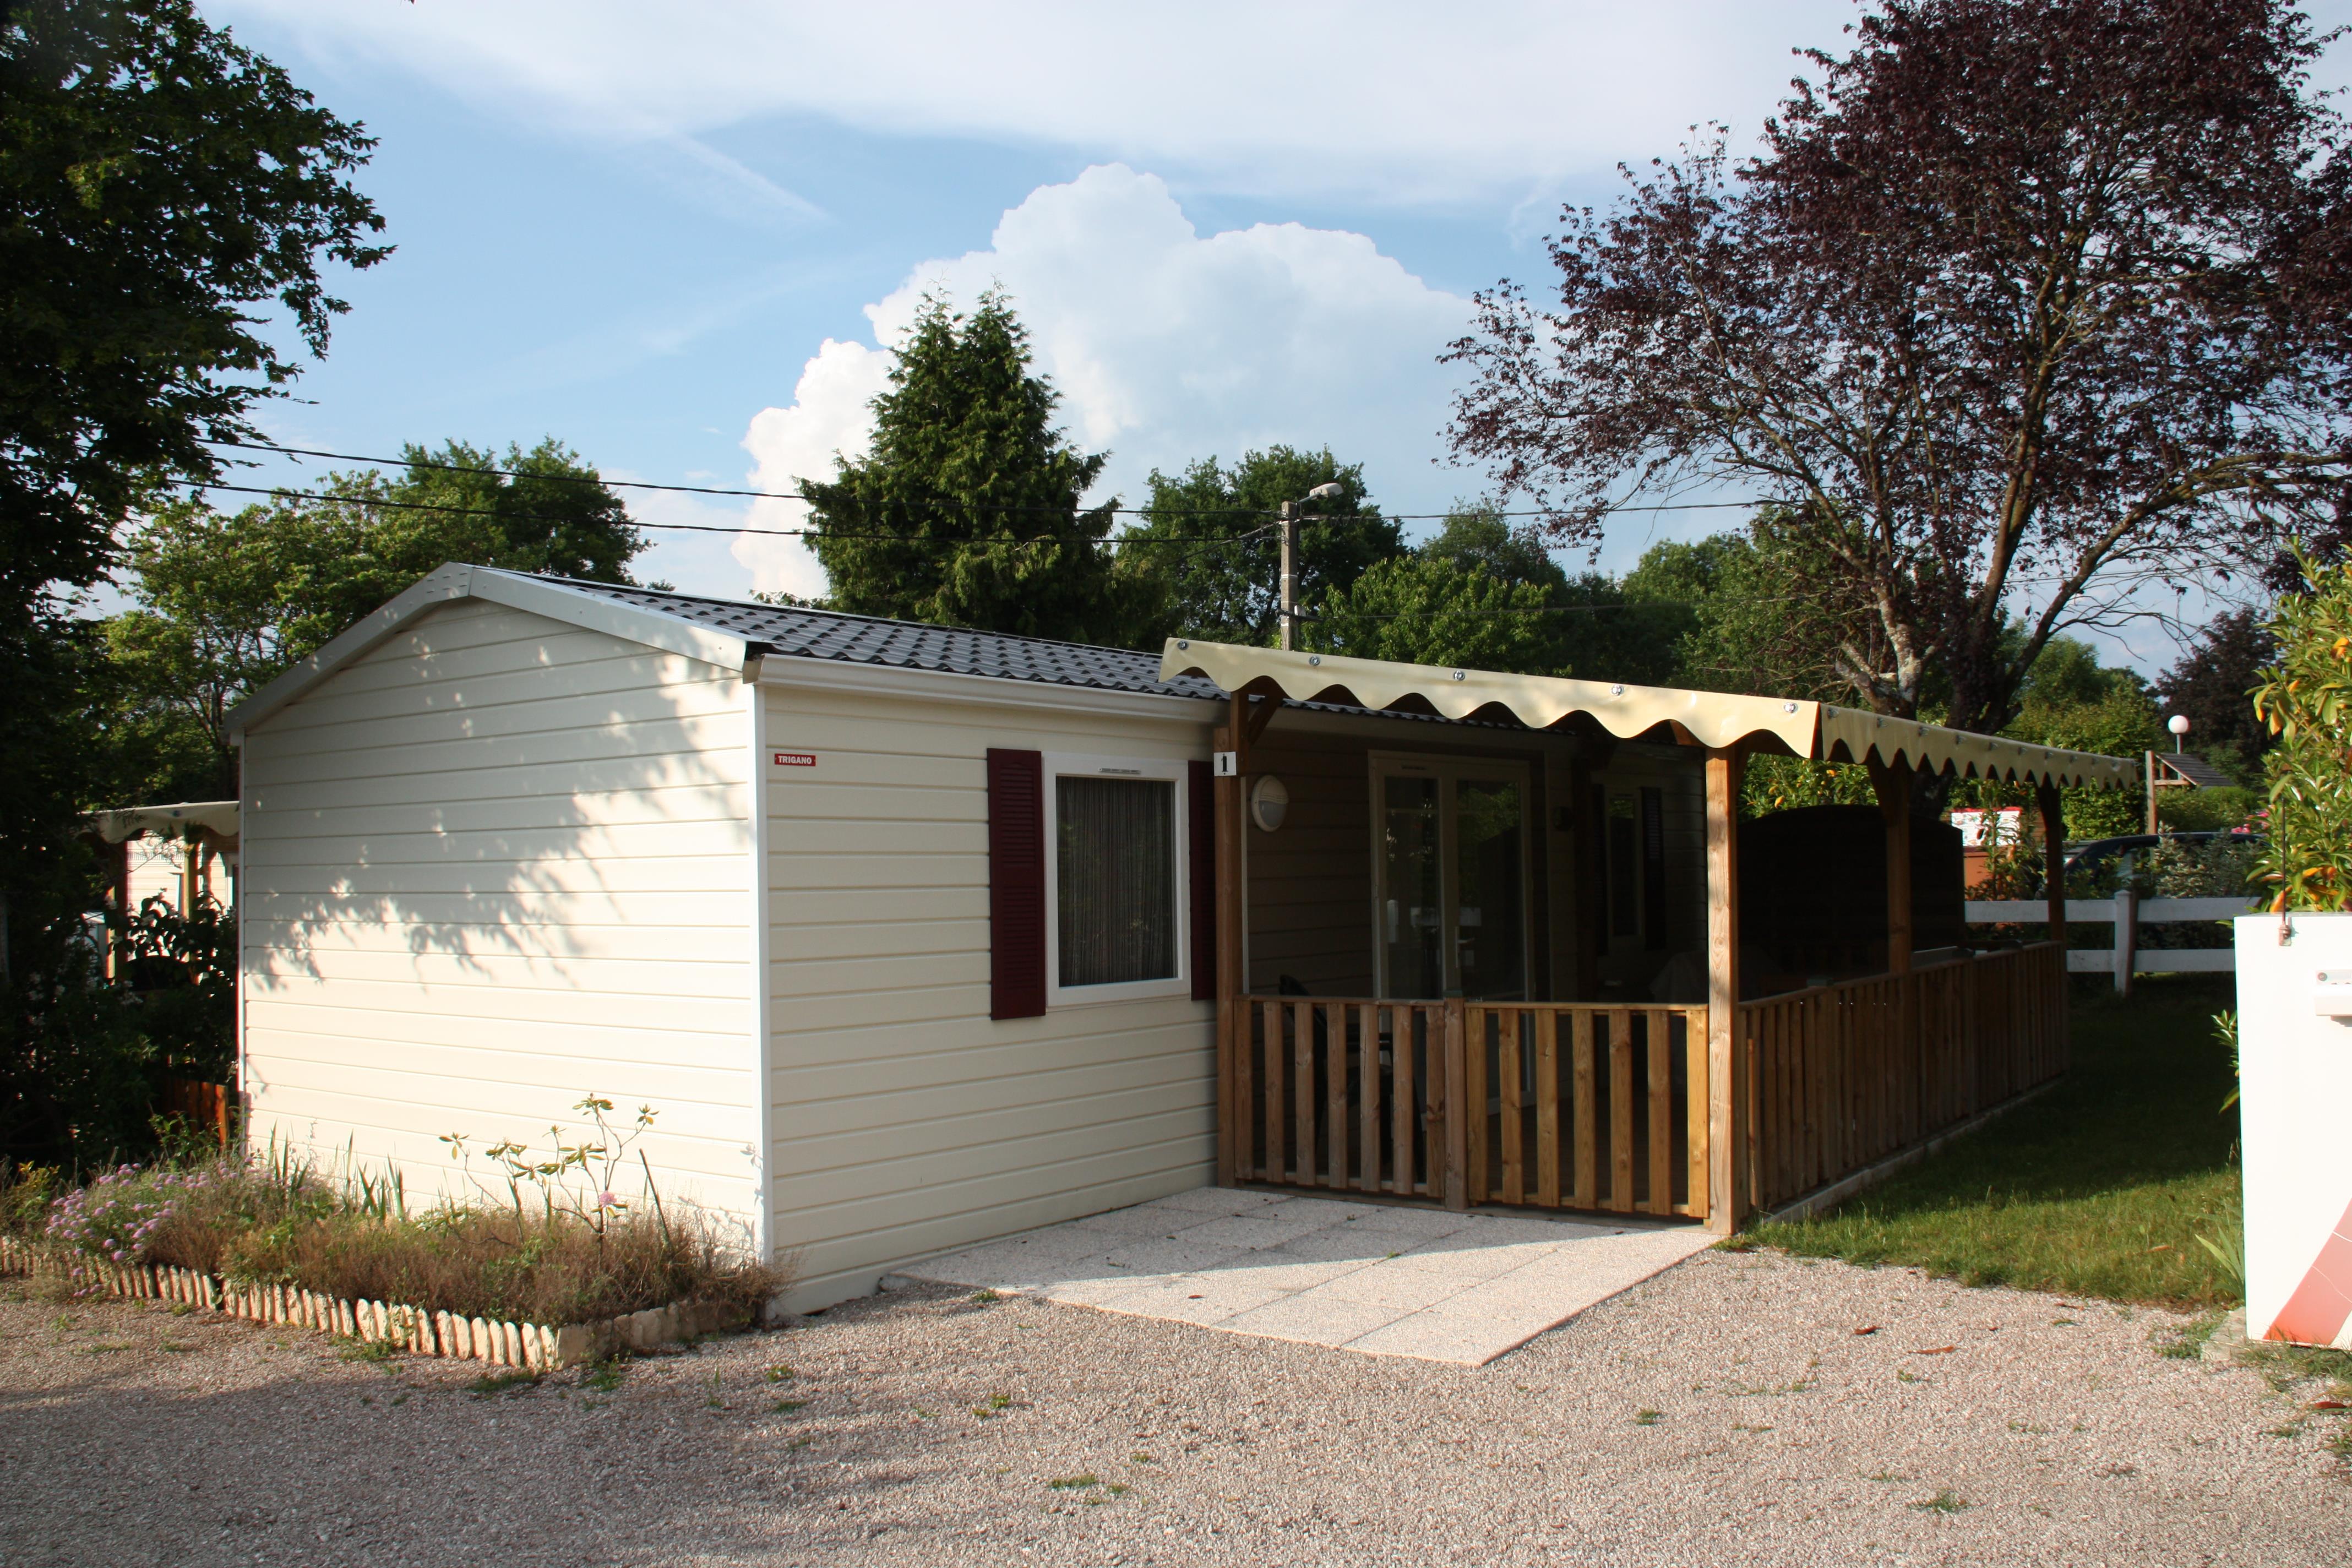 Accommodation - Mobile Home Optimeo Pmr 35M² (Adapted To The People With Reduced Mobility) - Camping La Renouillère